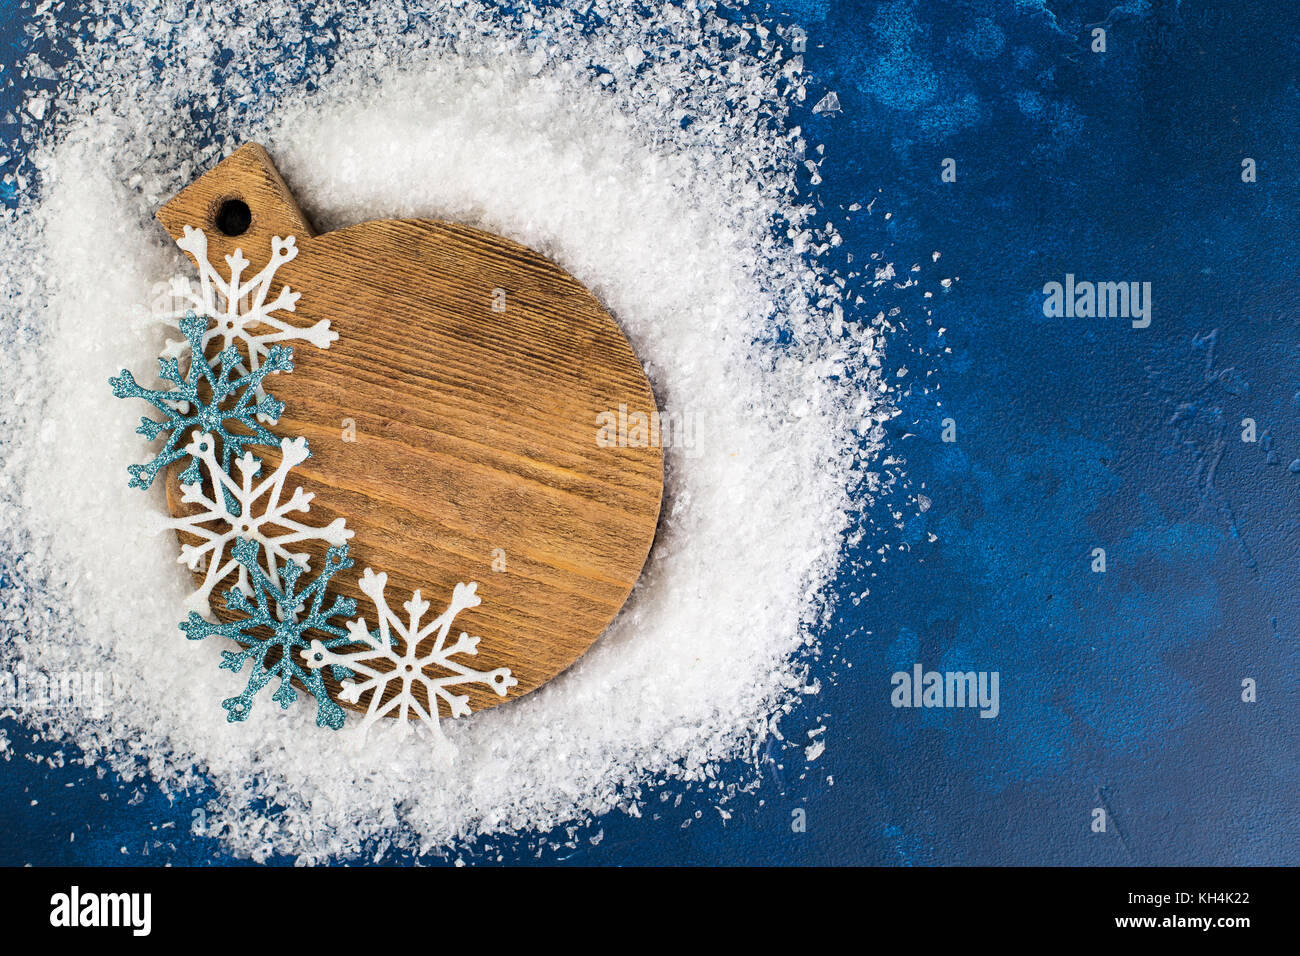 Dark blue background with a rouns board and some sparkling snowflake decorations Stock Photo